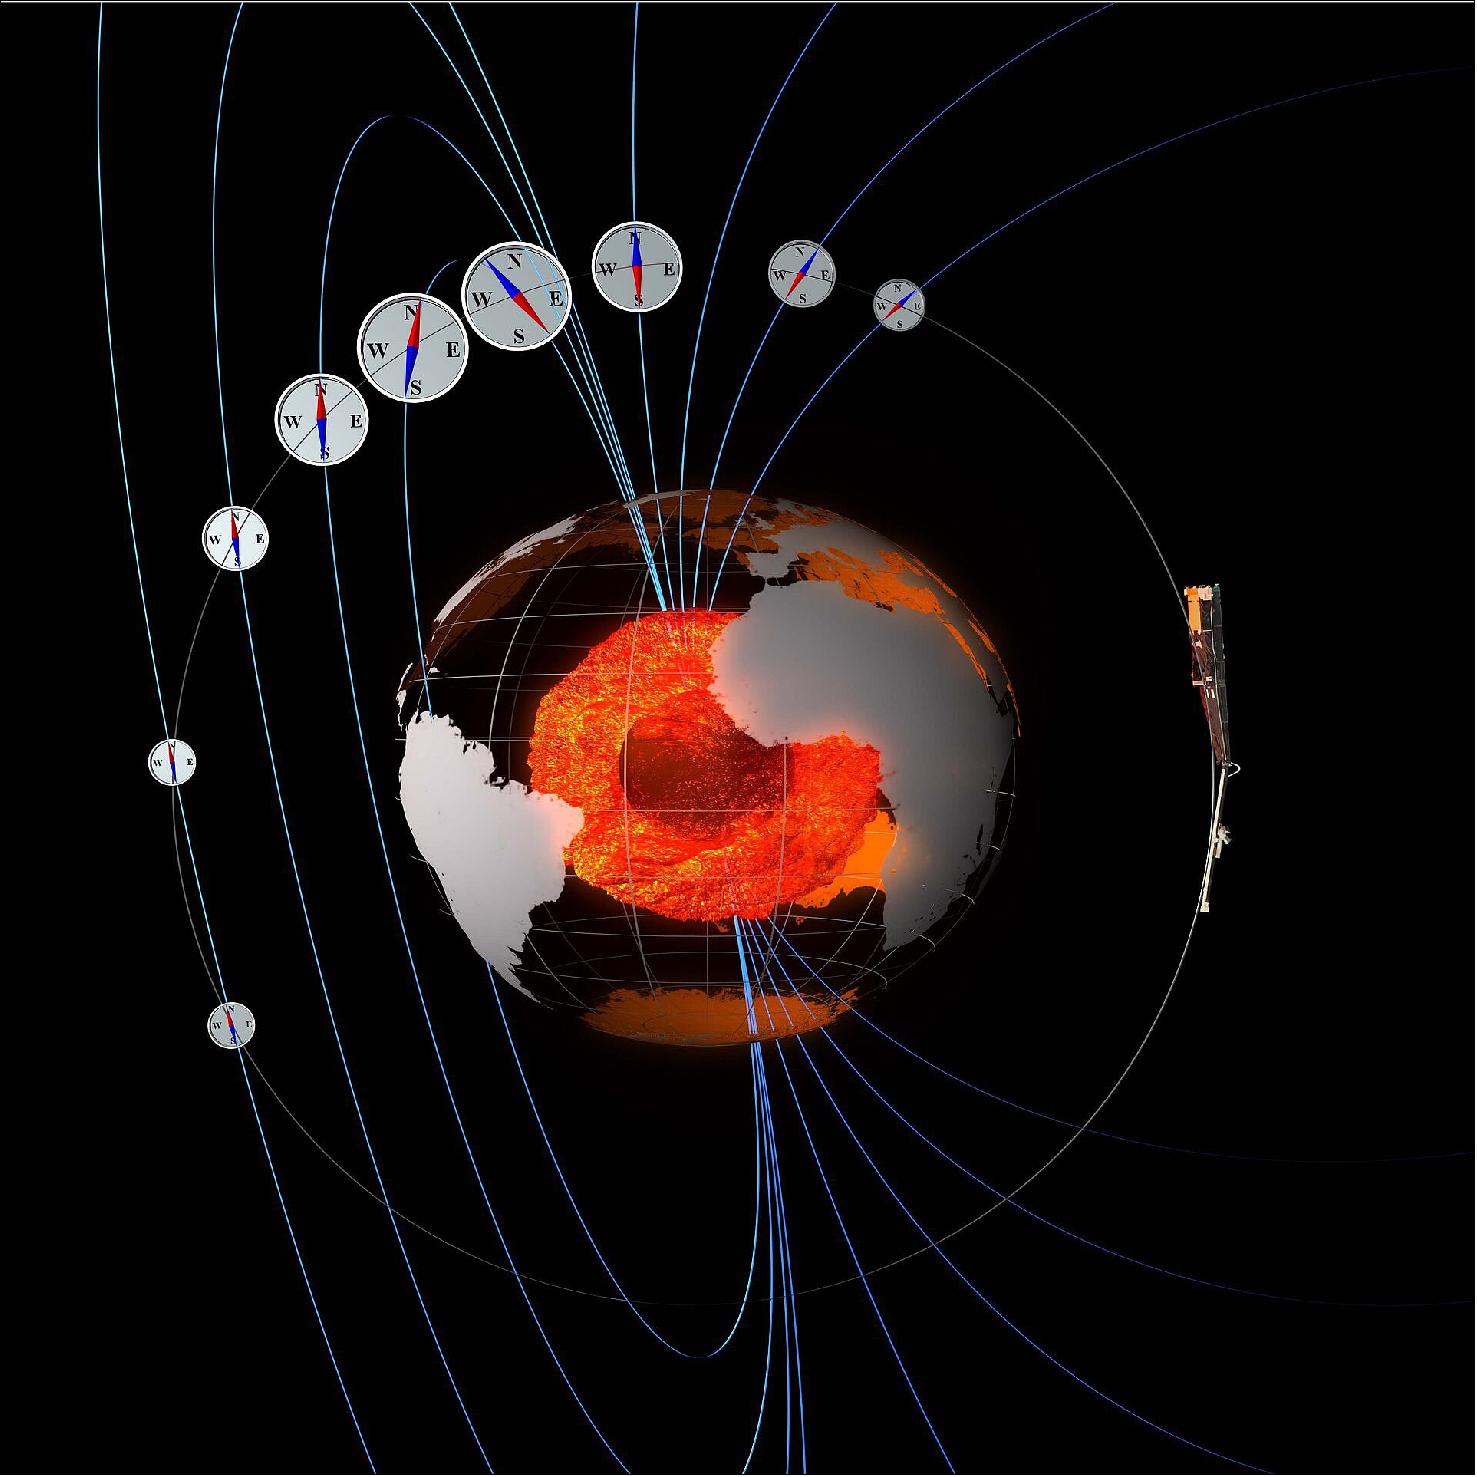 Figure 50: Swarm compasses. Like '3D compasses', the Swarm satellites measure the strength and direction of Earth's magnetic field (image credit: ESA/ATG Medialab)